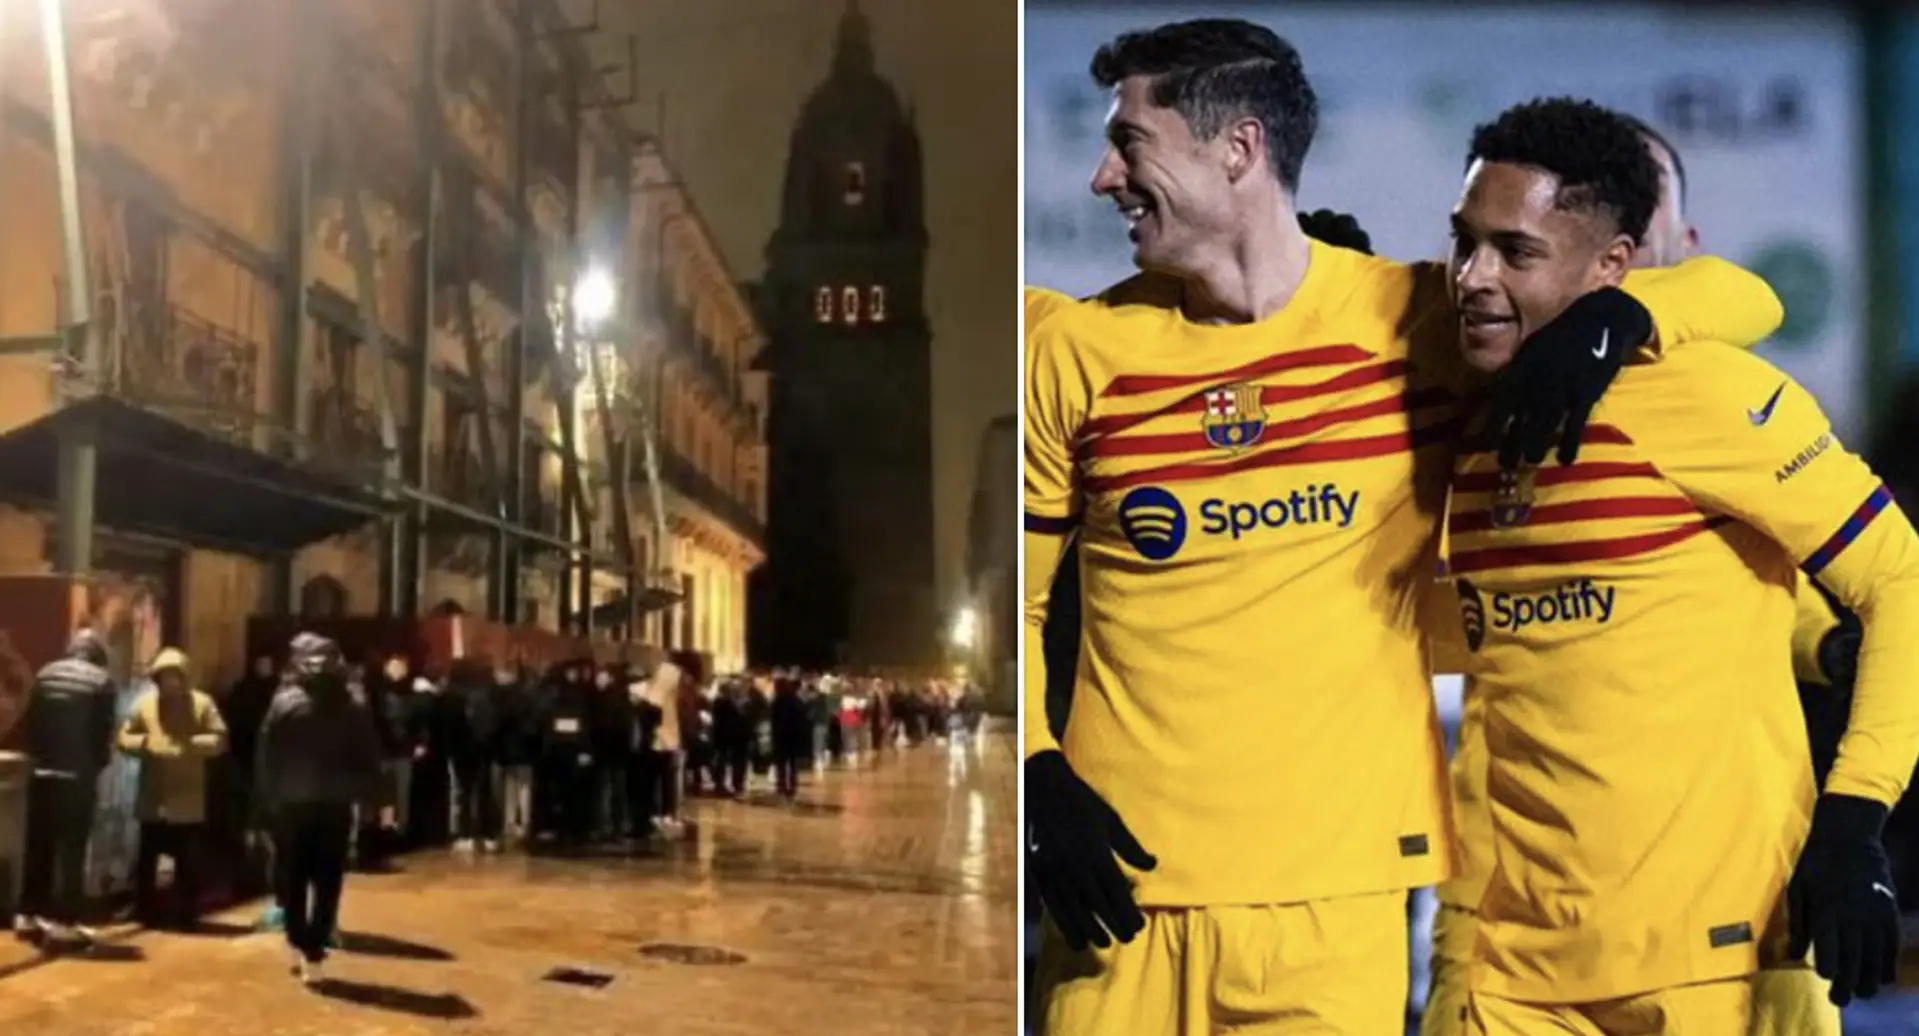 Unionistas fans spent the night on the street to bank tickets for Barca clash in Copa del Rey